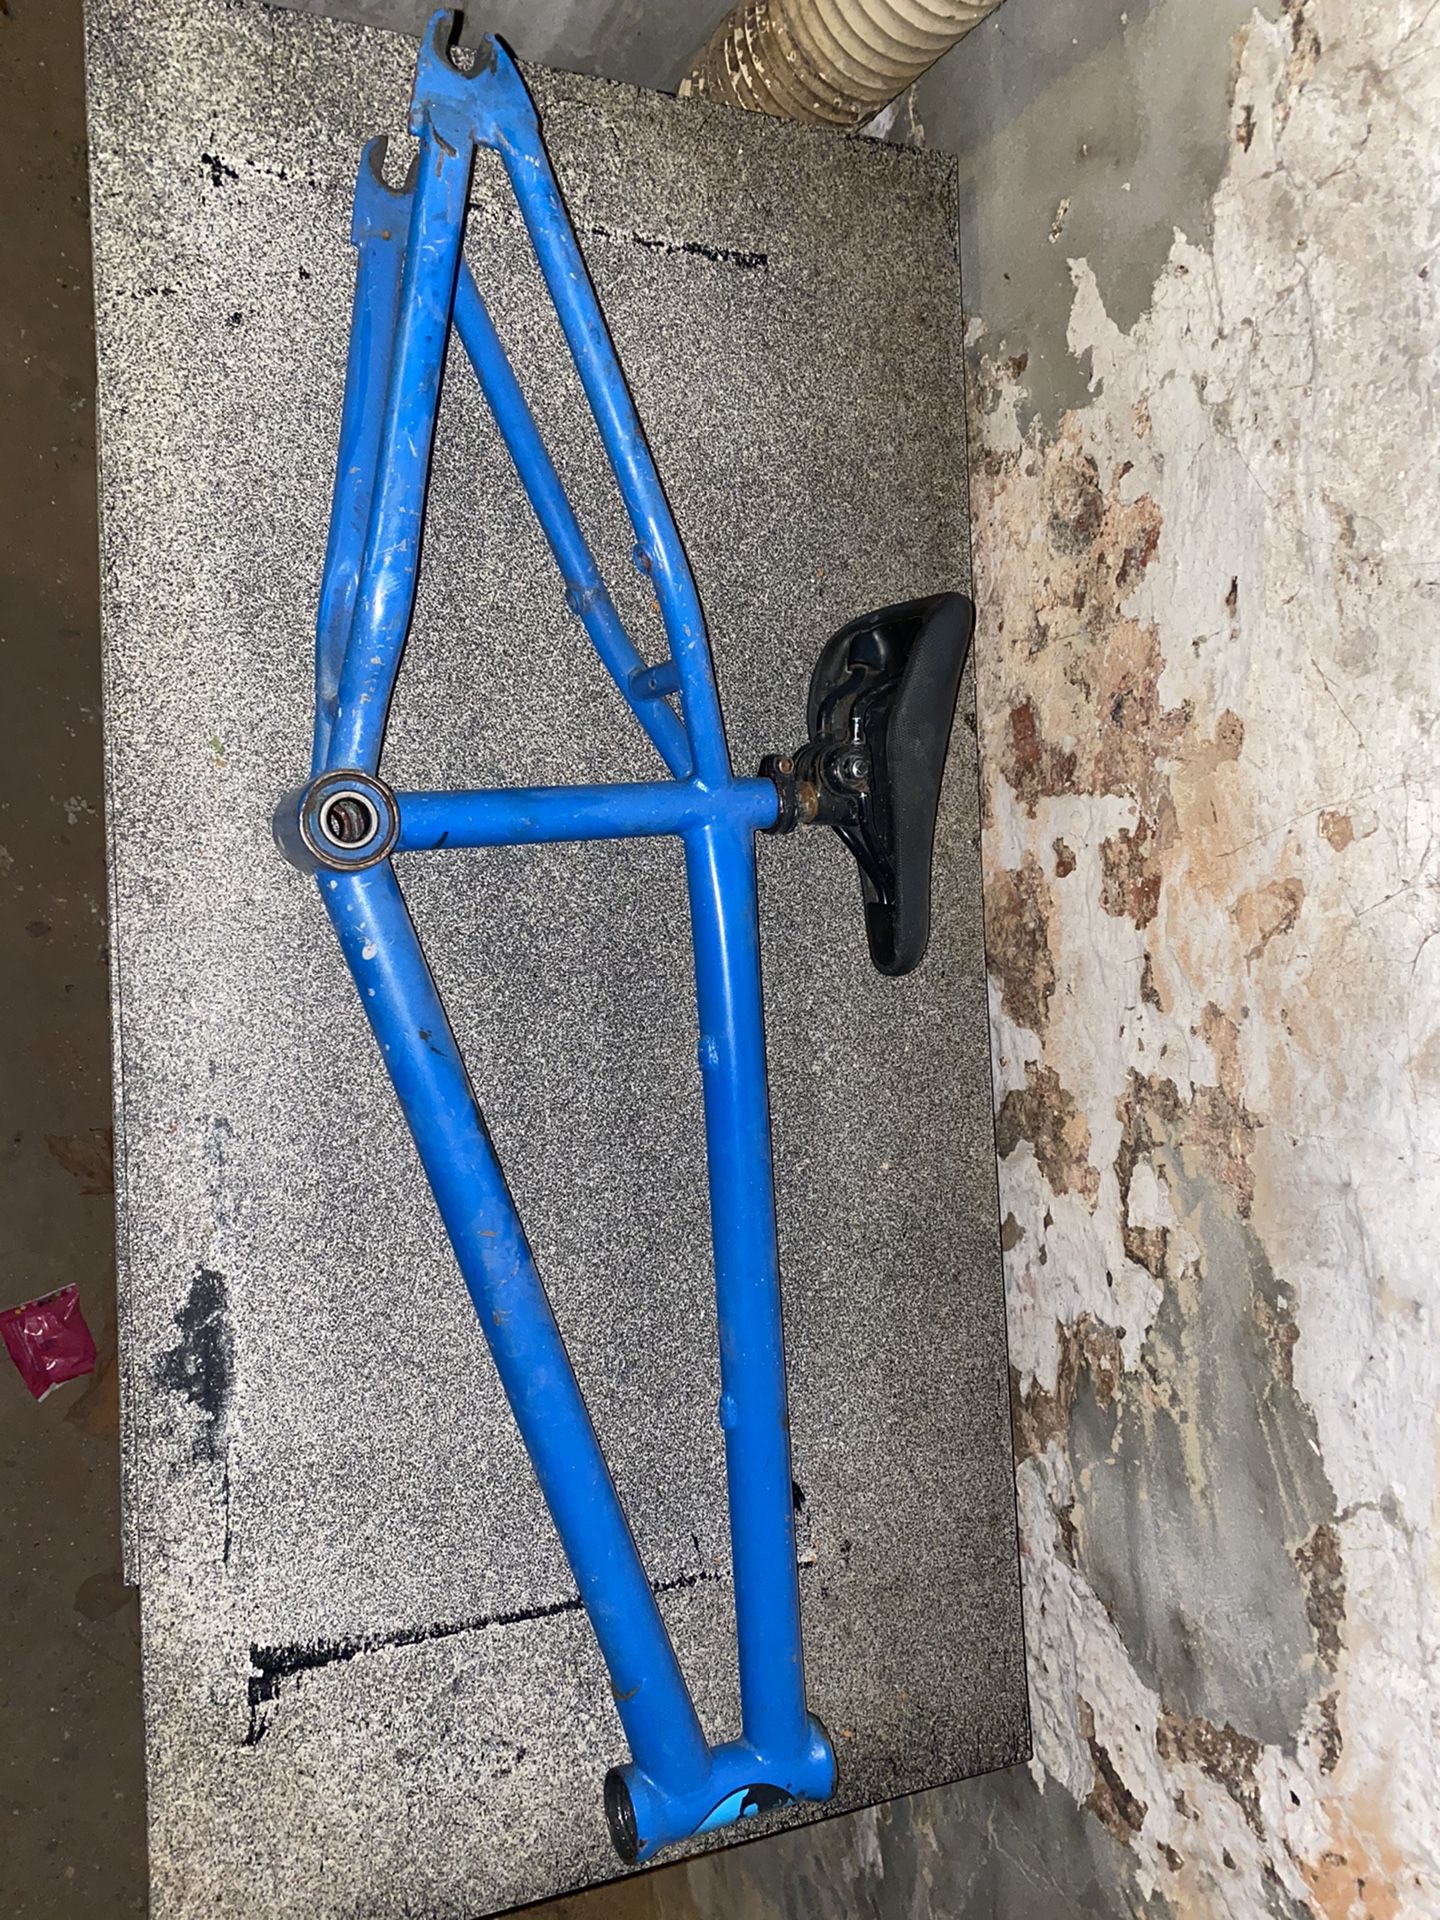 20 inch Bmx frame with haro seat